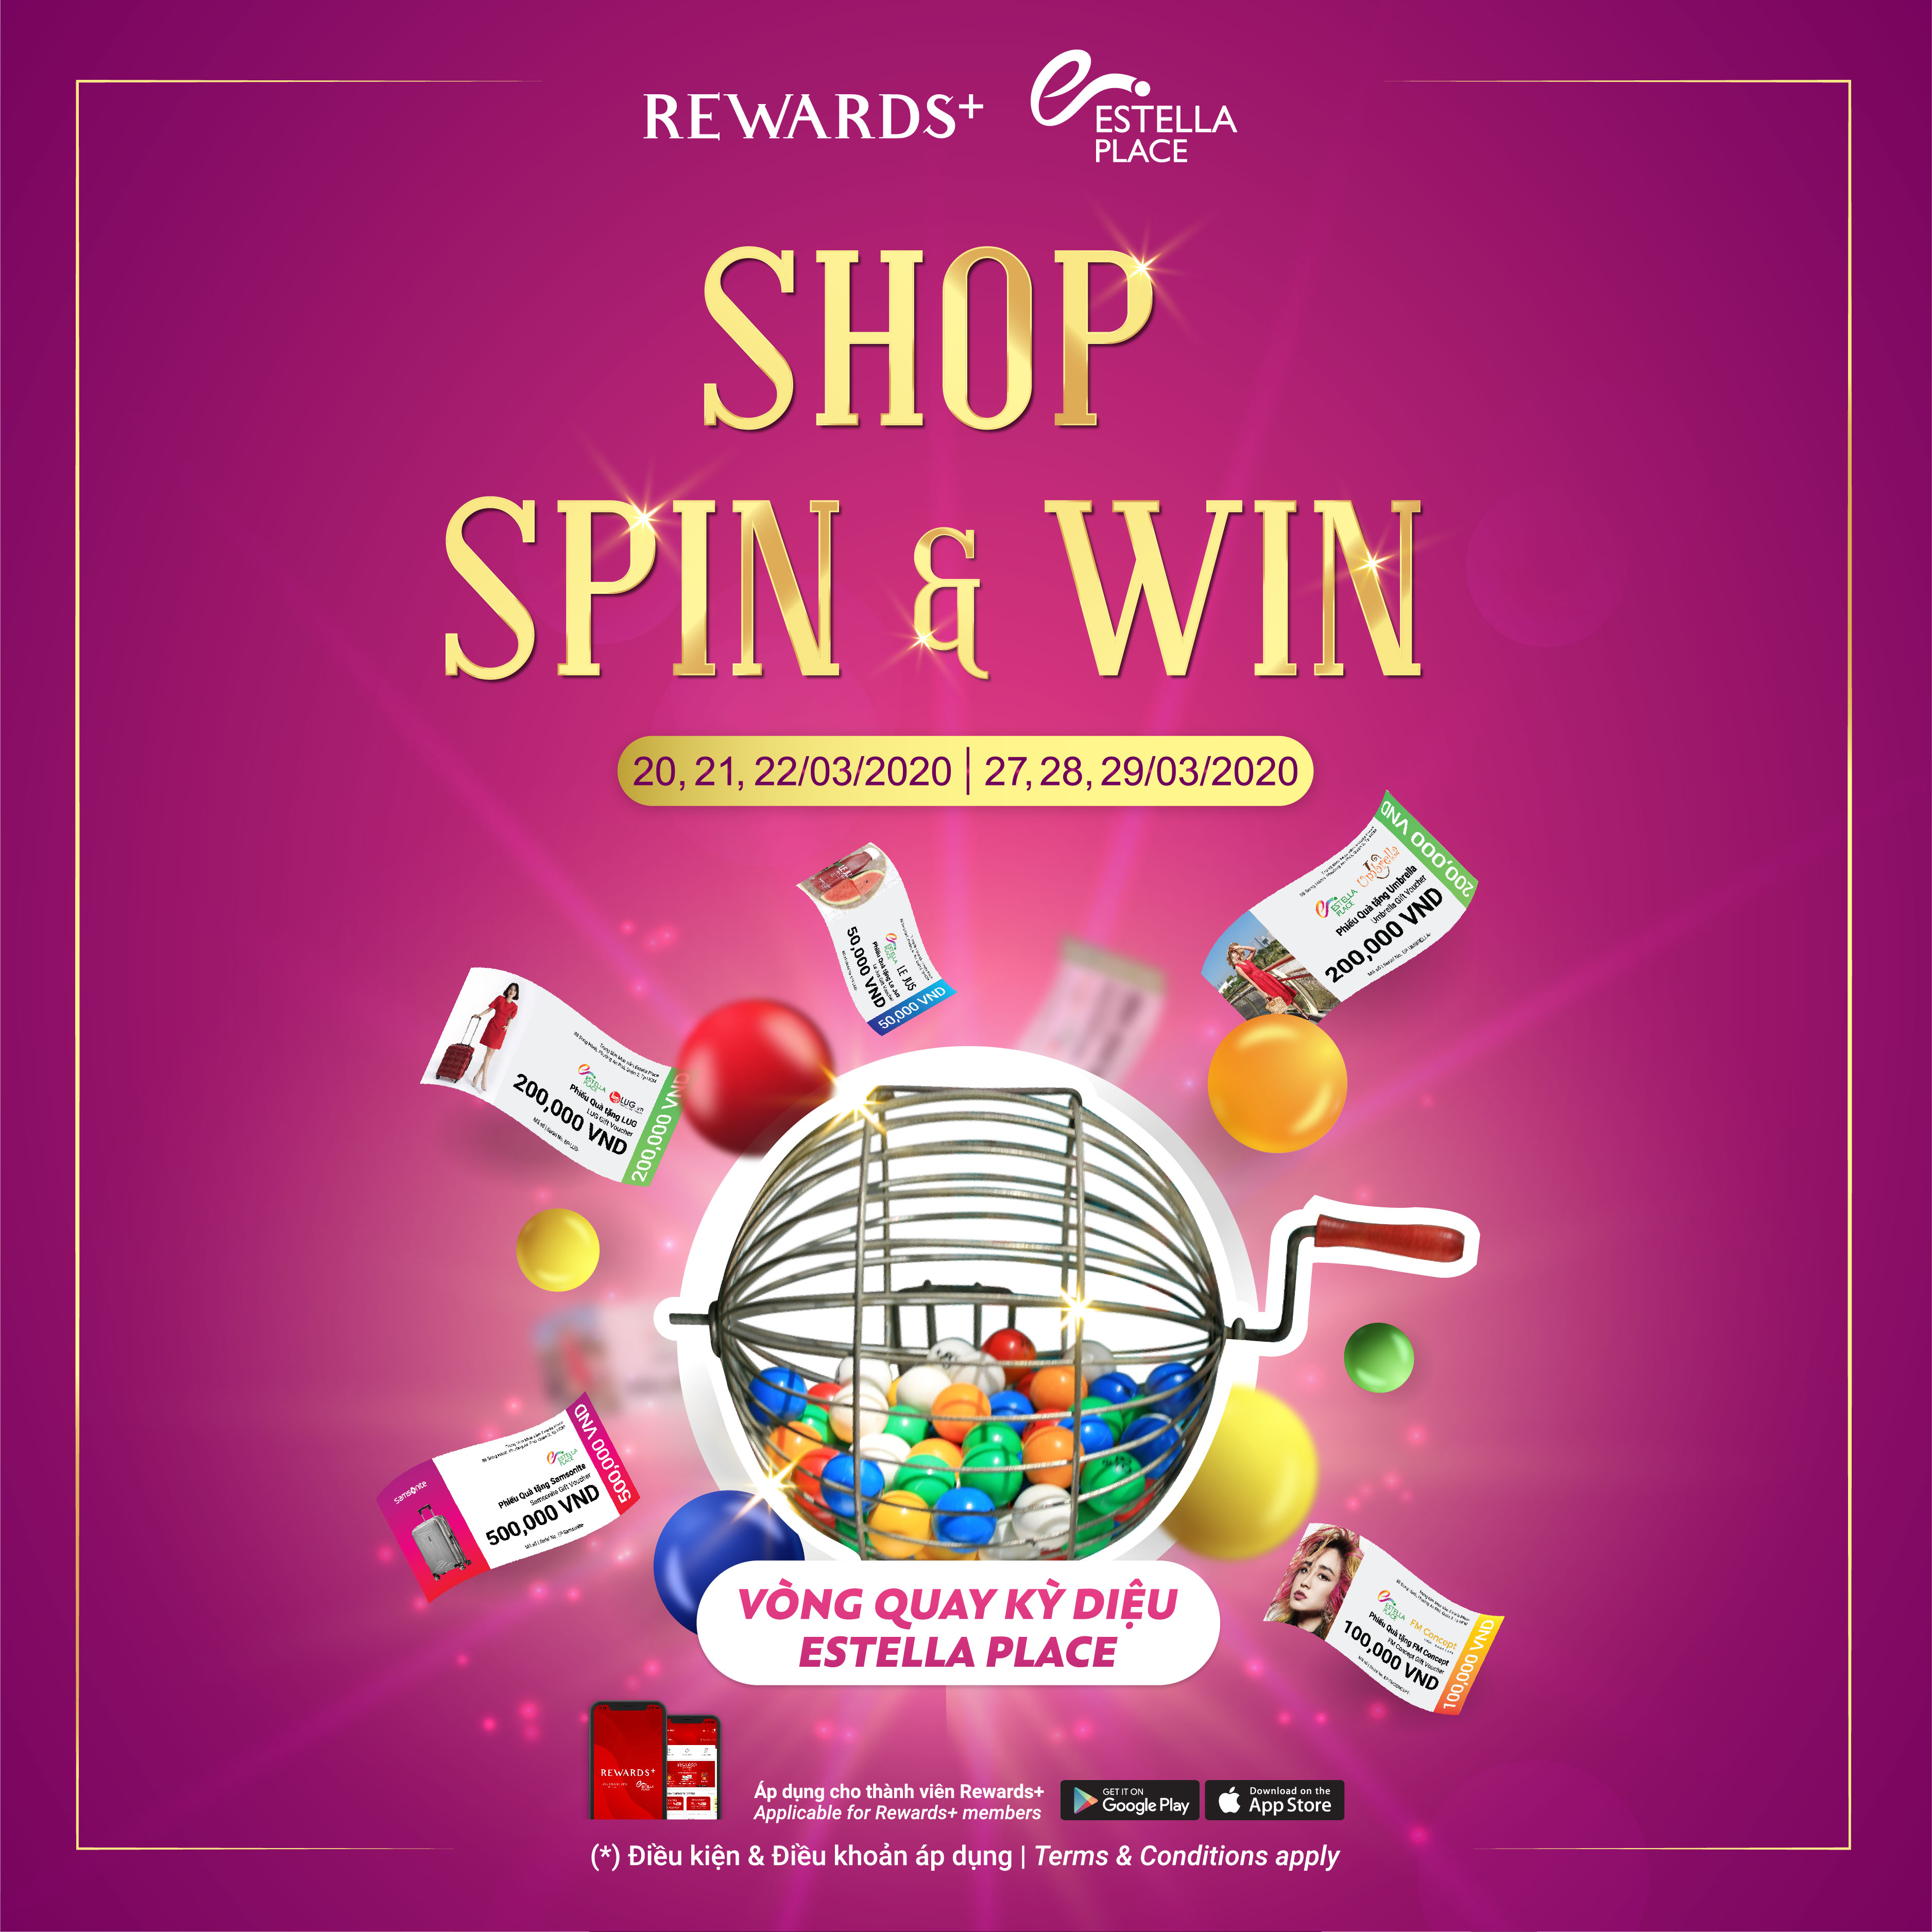 SHOP, SPIN & WIN AT ESTELLA PLACE